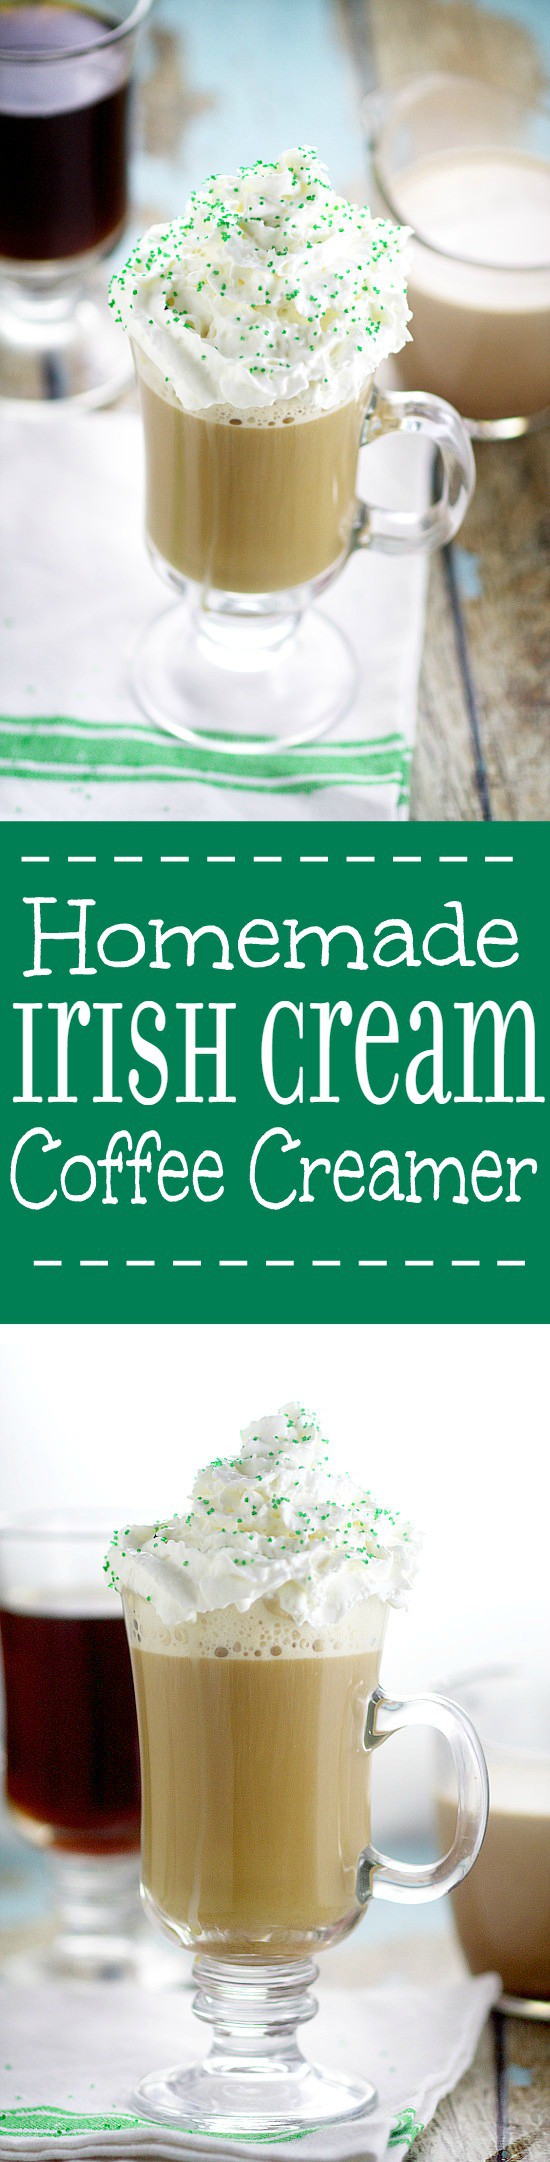  Homemade Irish Cream Coffee Creamer recipe. Make your own Homemade Irish Cream Coffee Creamer in just 20 minutes that tastes even more amazing than your favorite from the store. A frugal and delicious way to have your morning coffee.